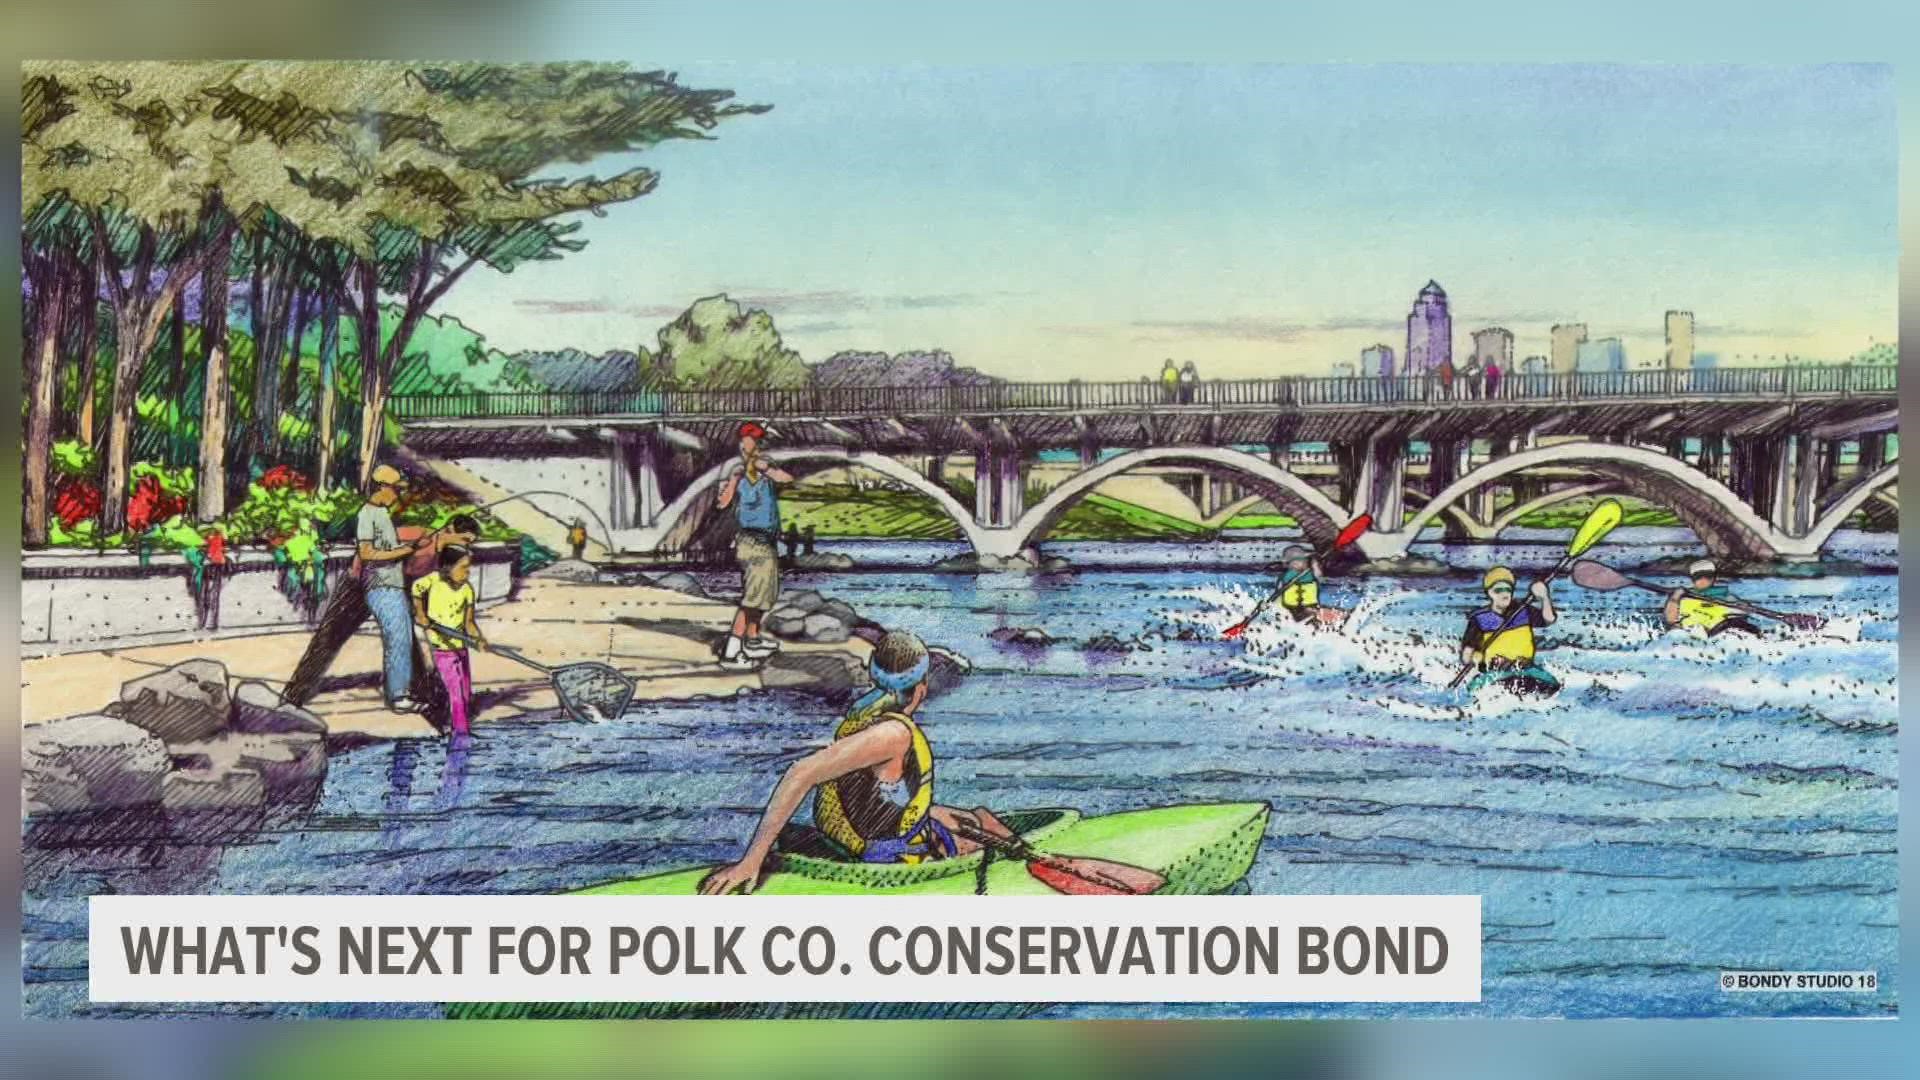 The improvements to Polk County's water quality and land preservation won't happen overnight, but will certainly be coming in the near future.